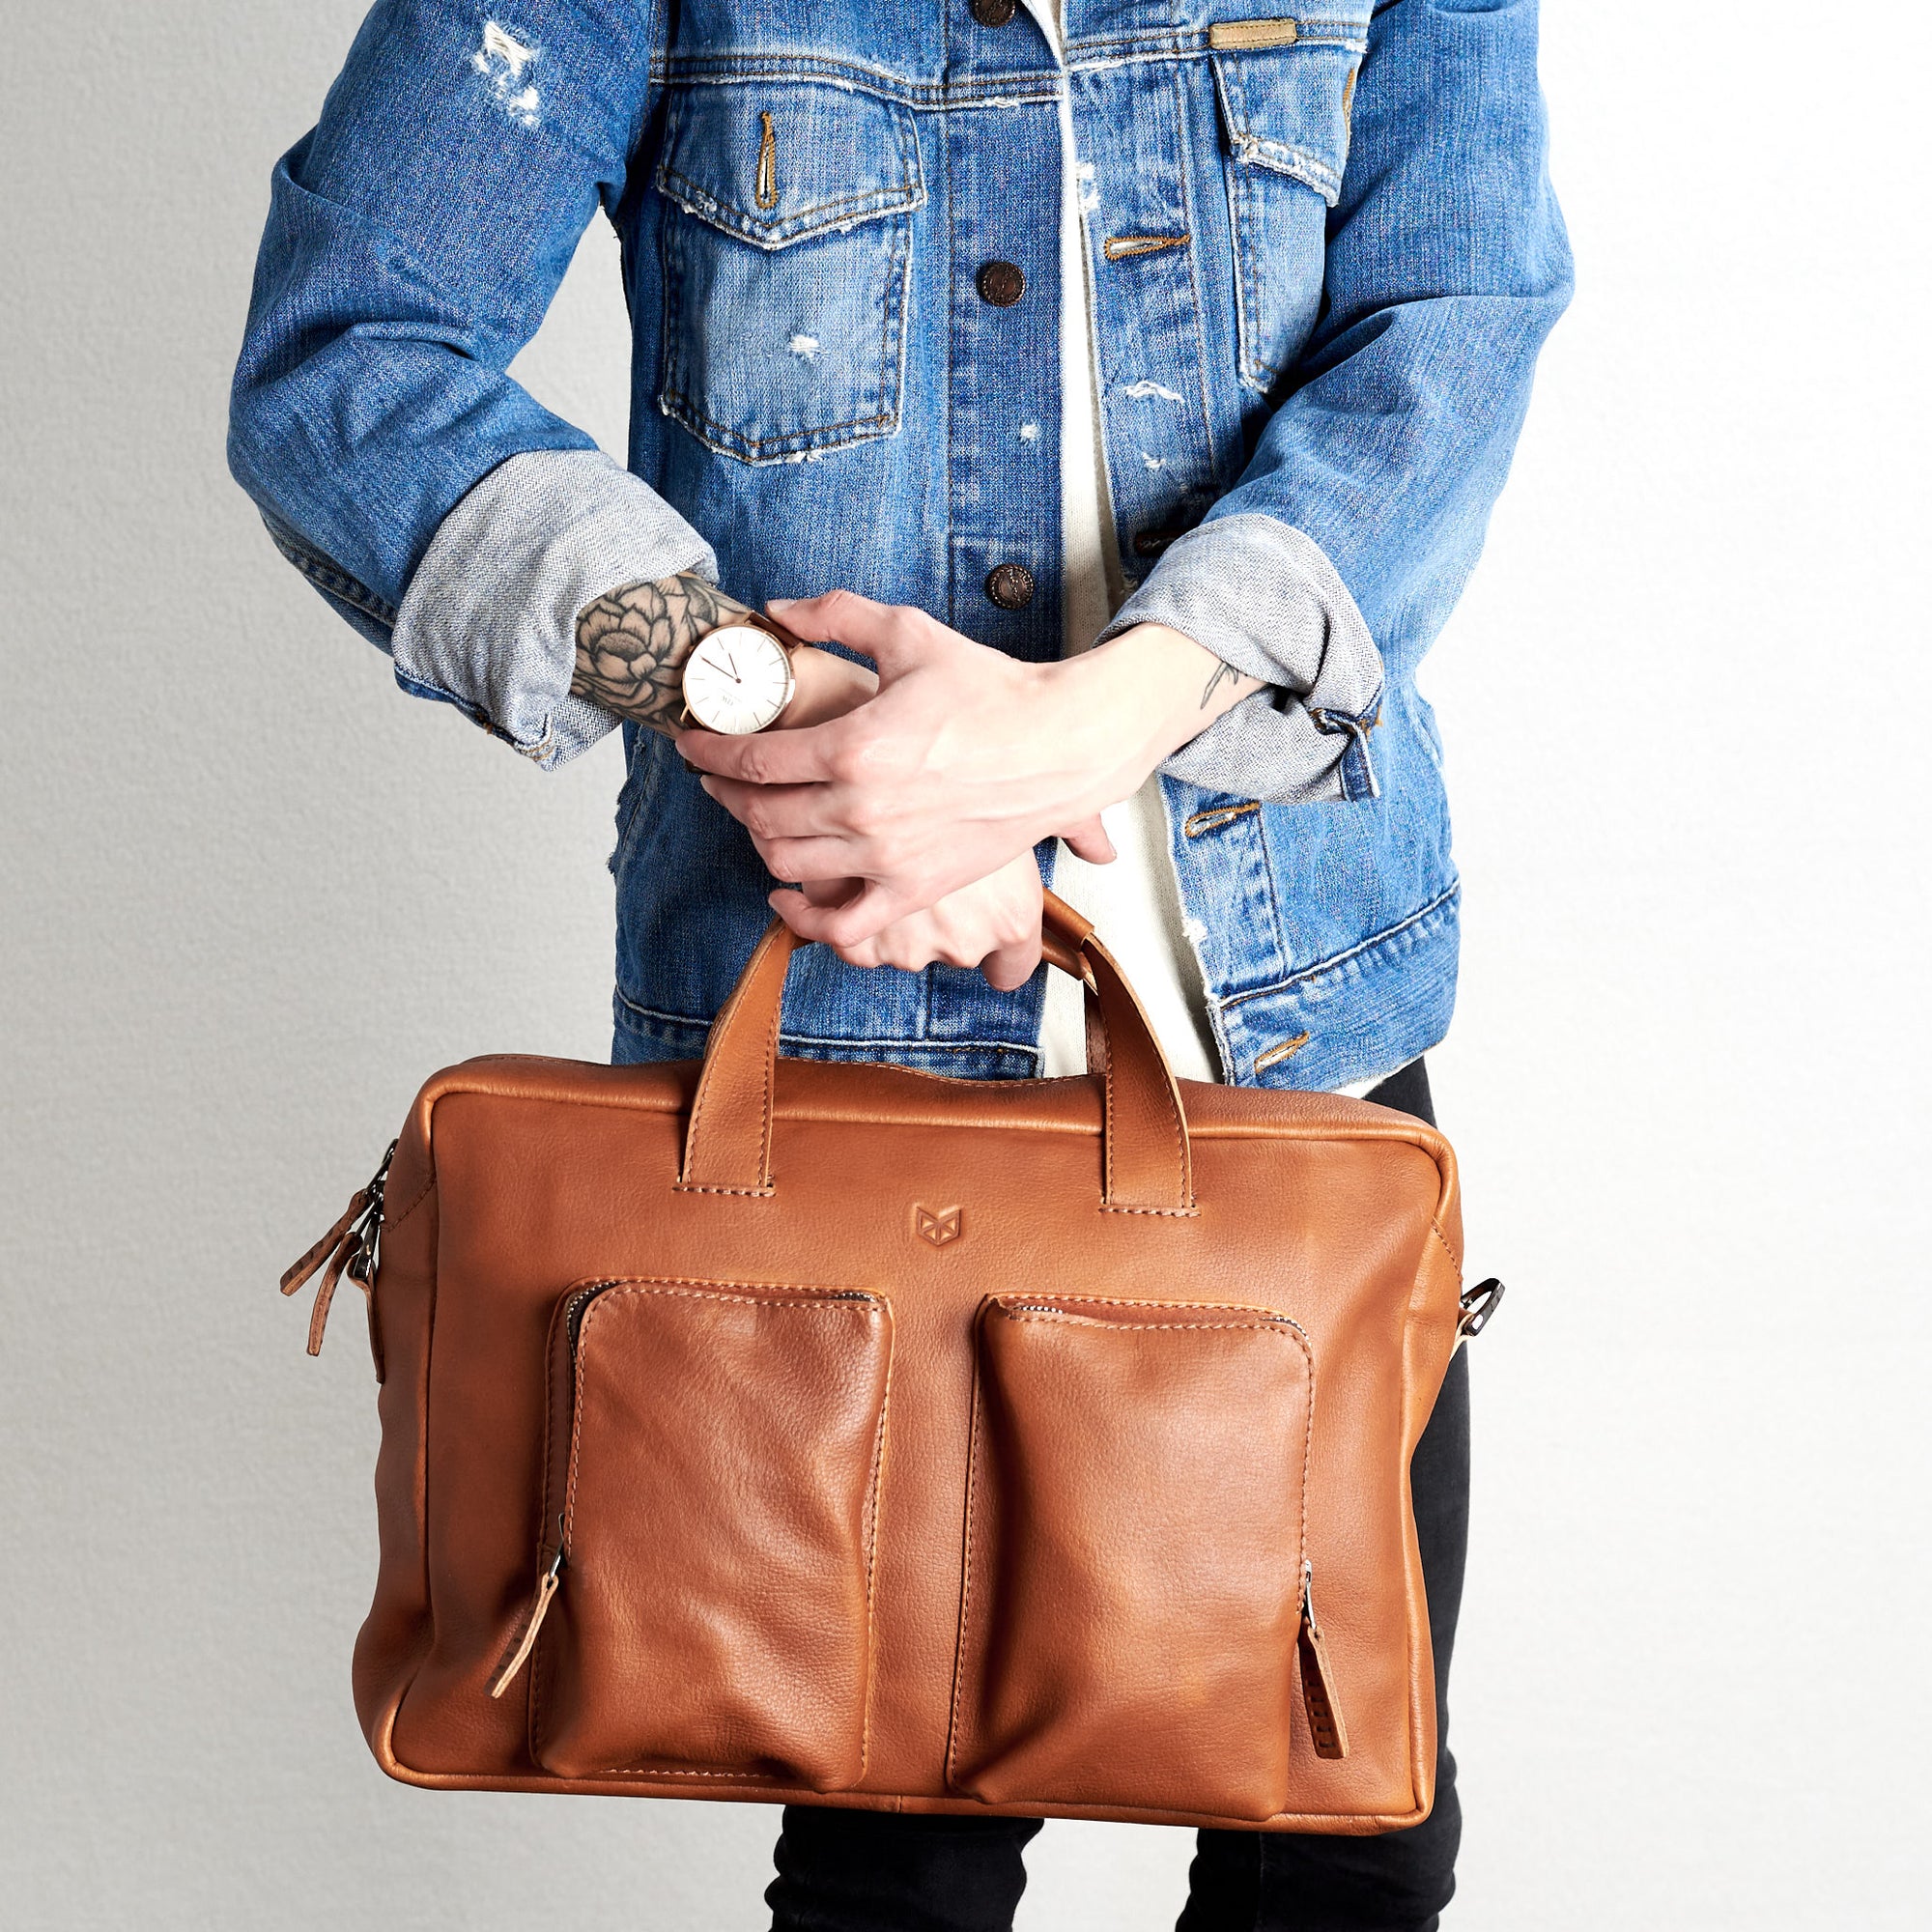 Style front view. Tan Equz messenger bag by Capra Leather. 